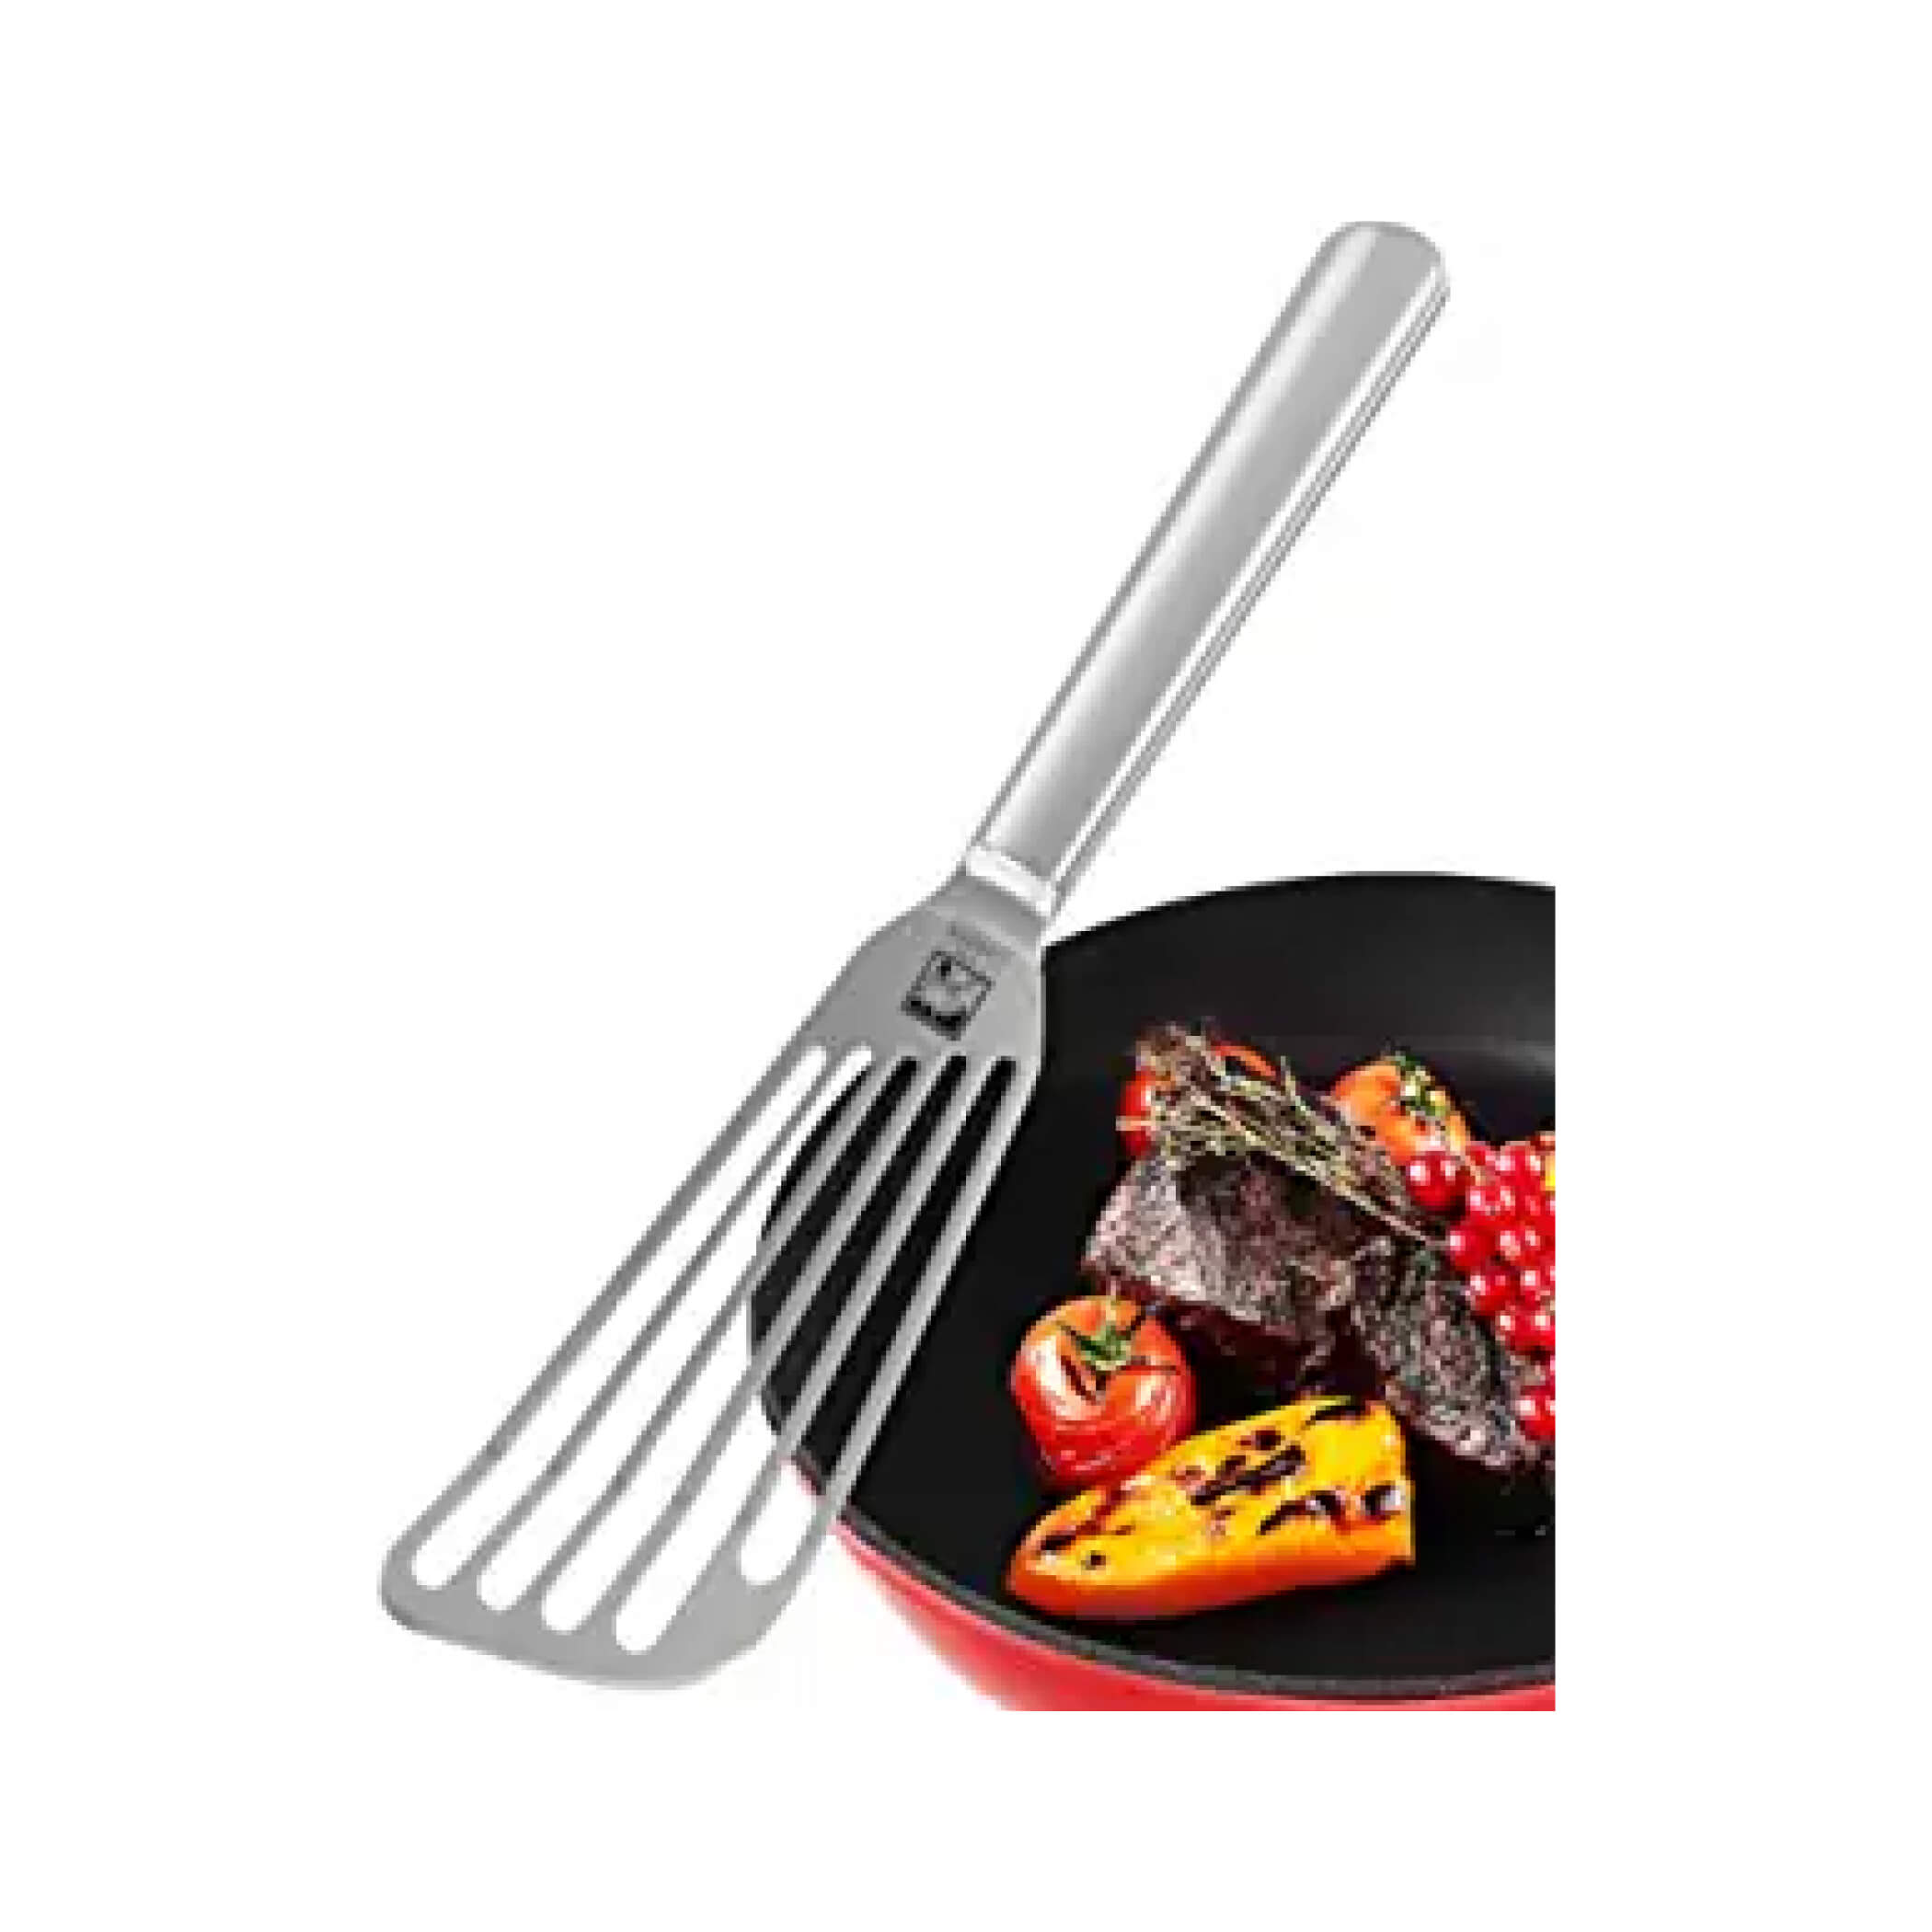 Slotted Fish Spatula Stainless Steel - 11-inch Thin Spatula Heat Resistant  with ABS Solid Handle - F…See more Slotted Fish Spatula Stainless Steel 